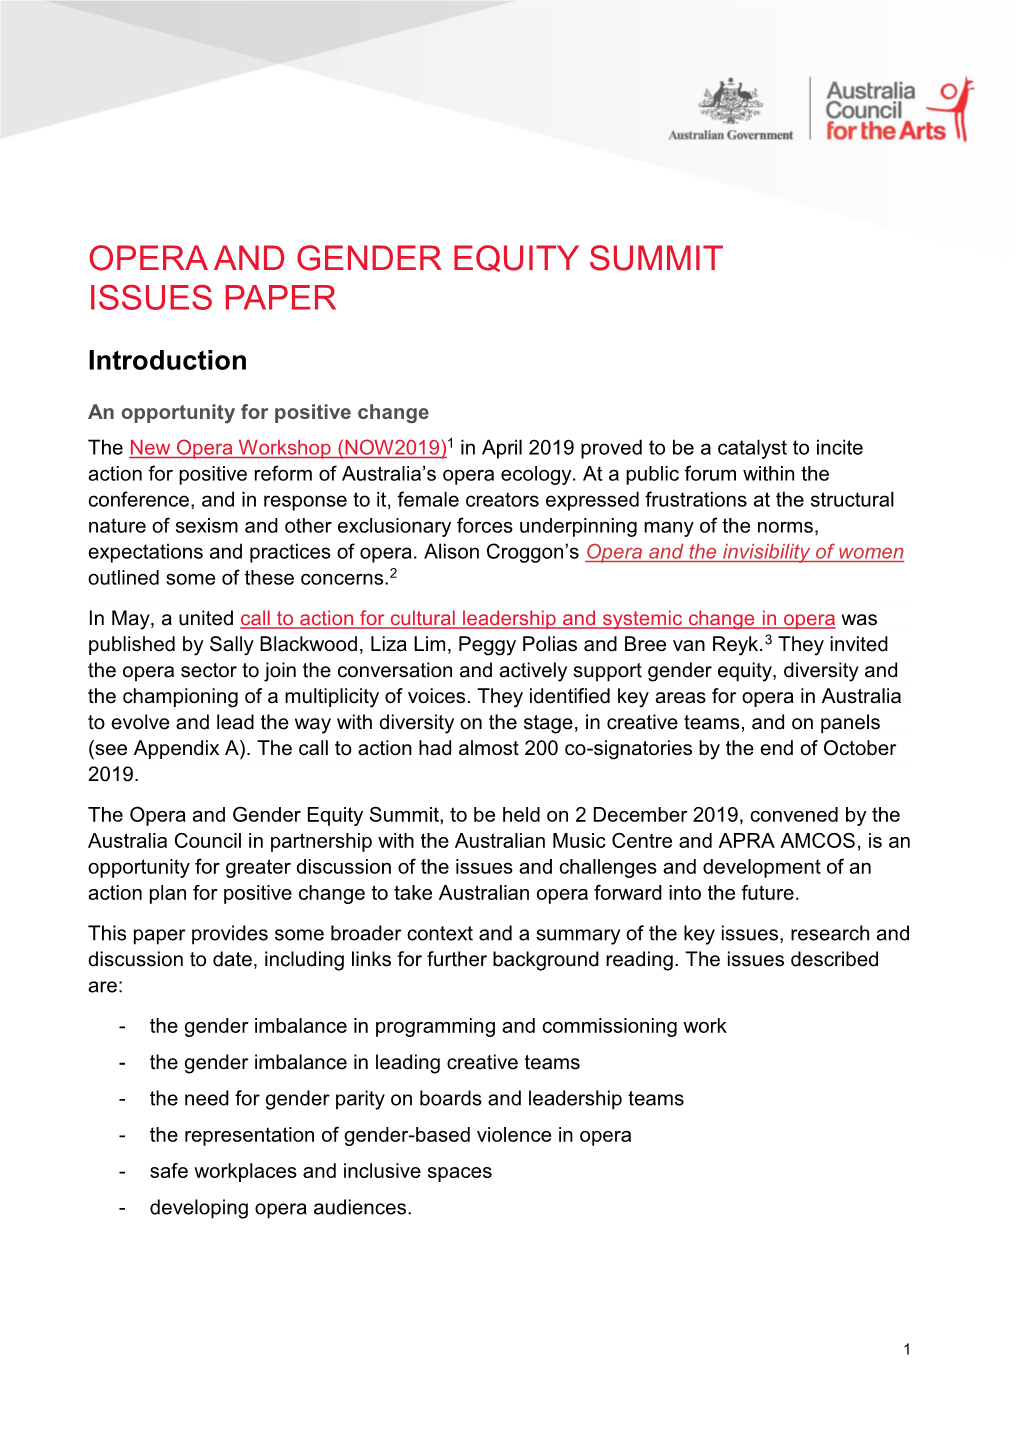 Opera and Gender Equity Summit Issues Paper